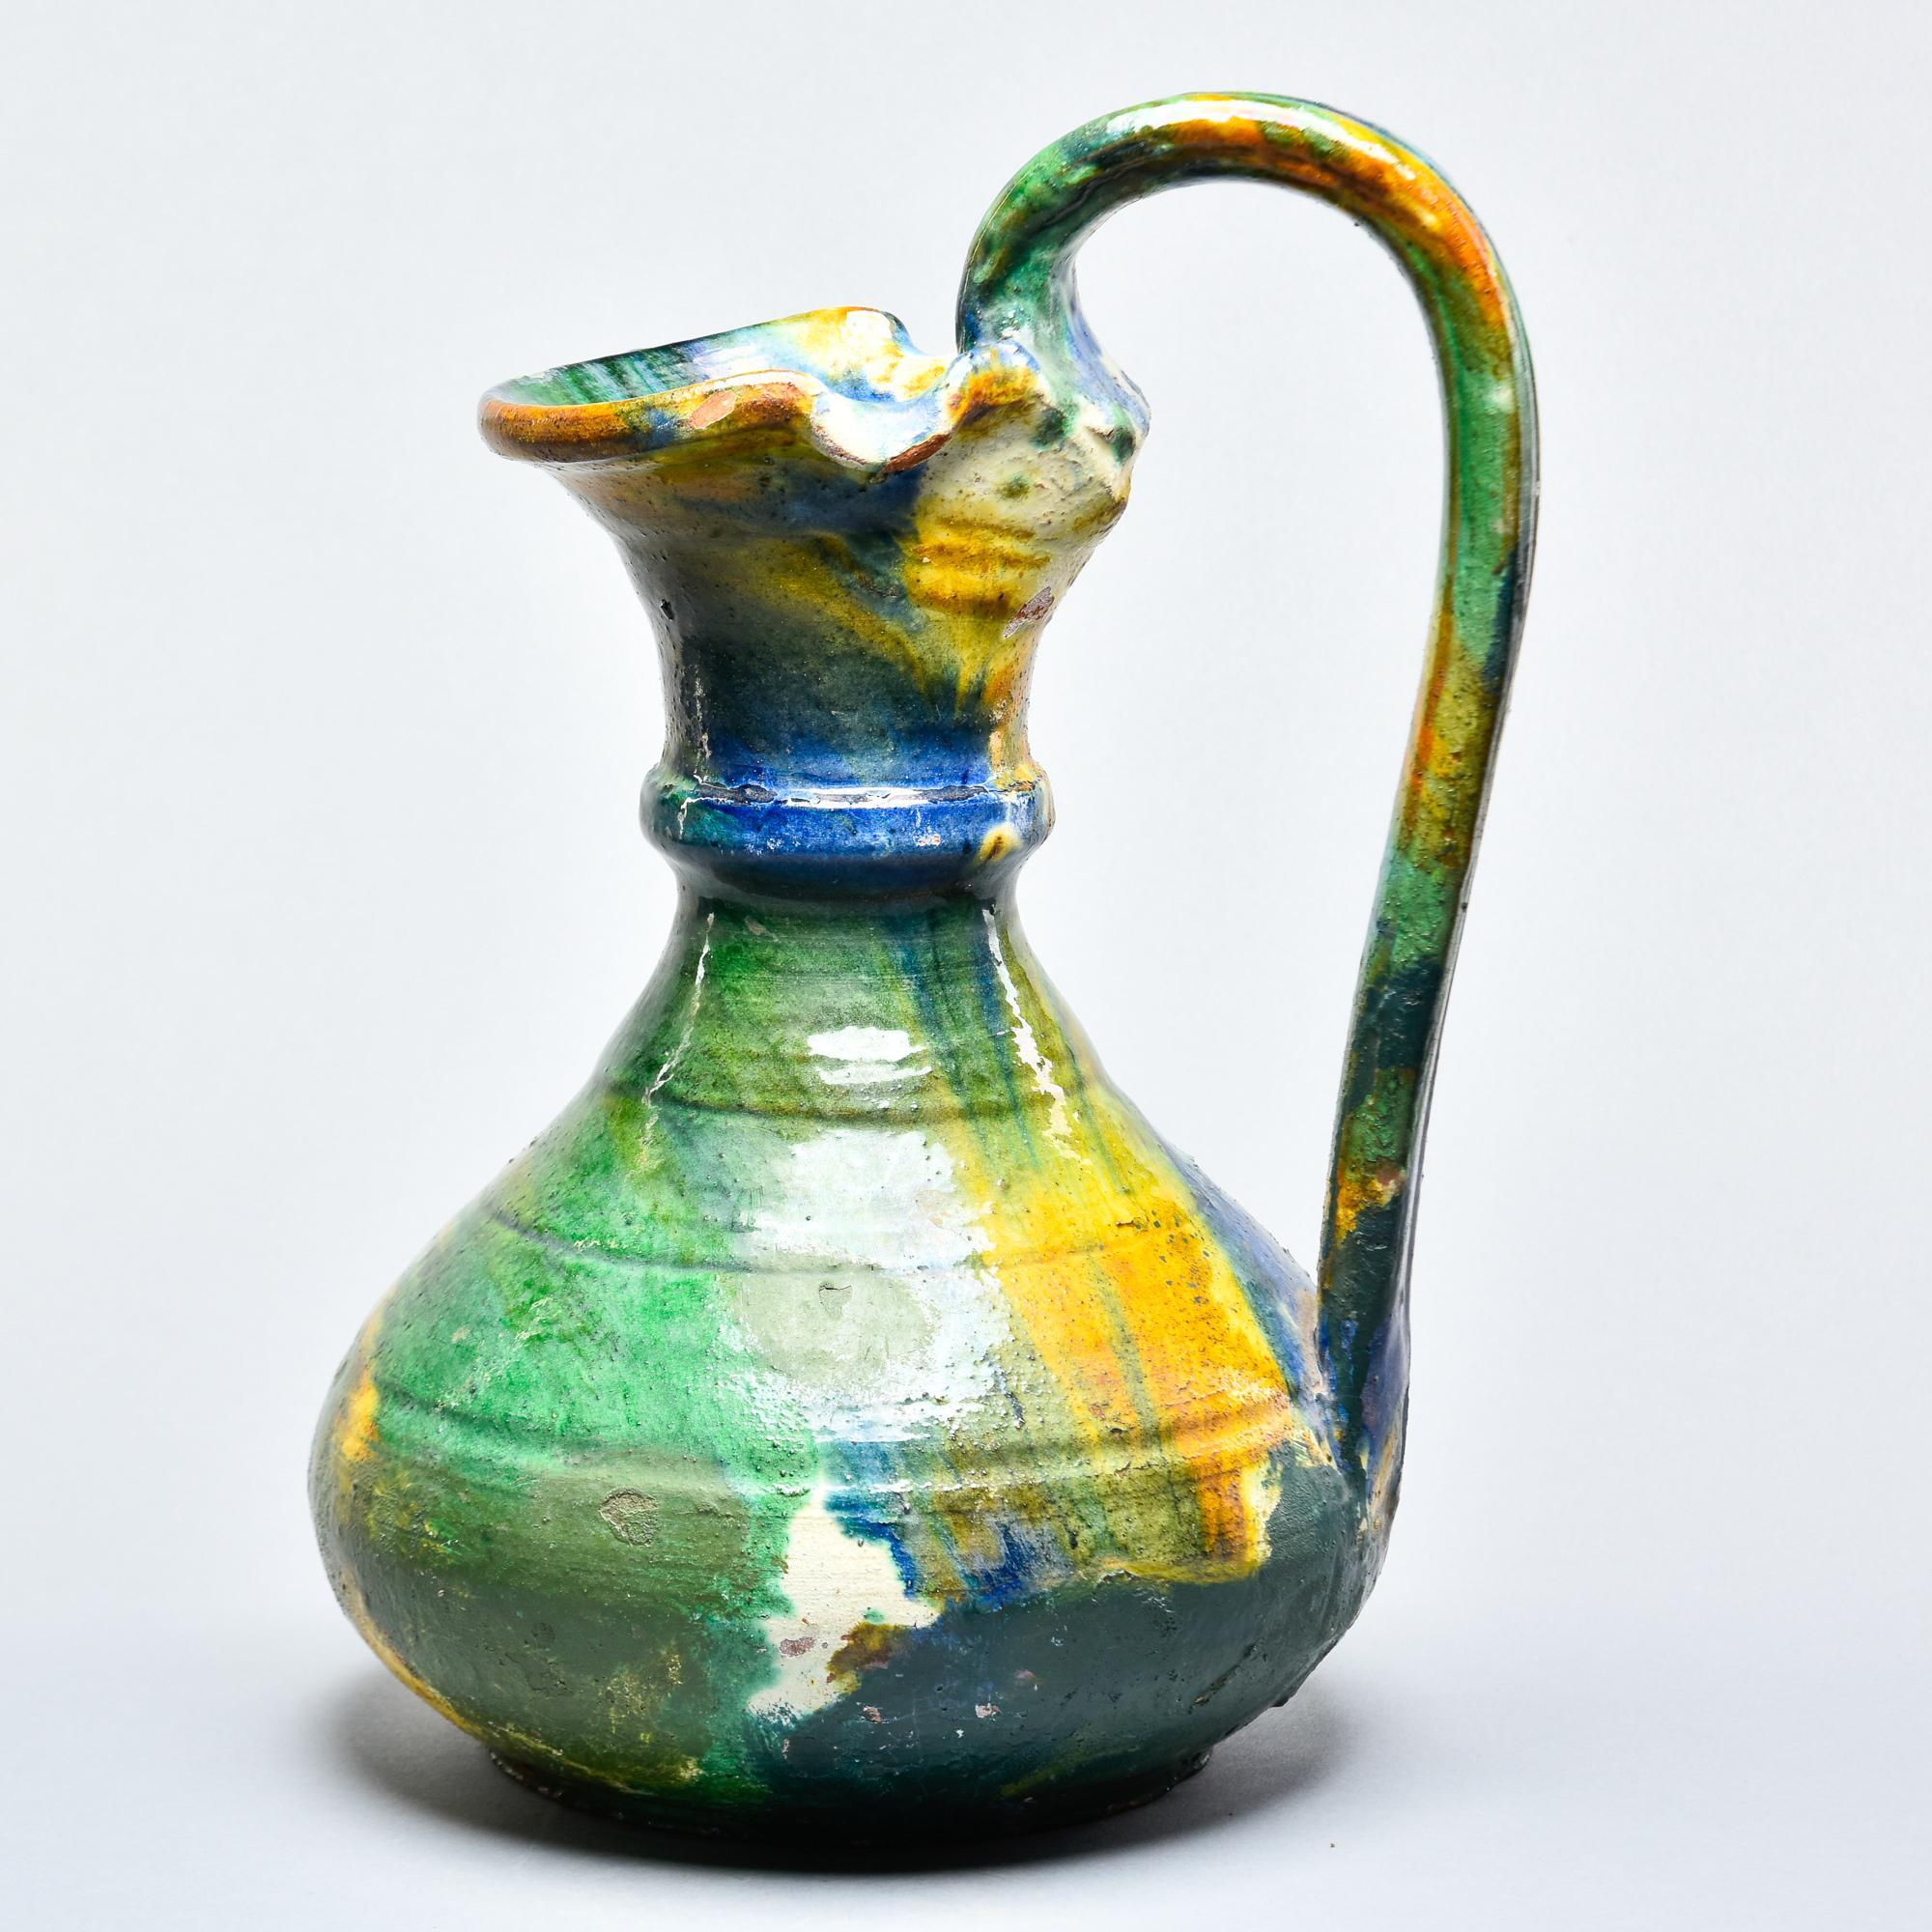 Found in France, this hand thrown ceramic French ewer or pitcher dates from approximately 1910. This piece stands 14.5” high and has a tall, curved handle and flared spout with a wide vessel body. Green, blue, gold and cream colored glaze on the